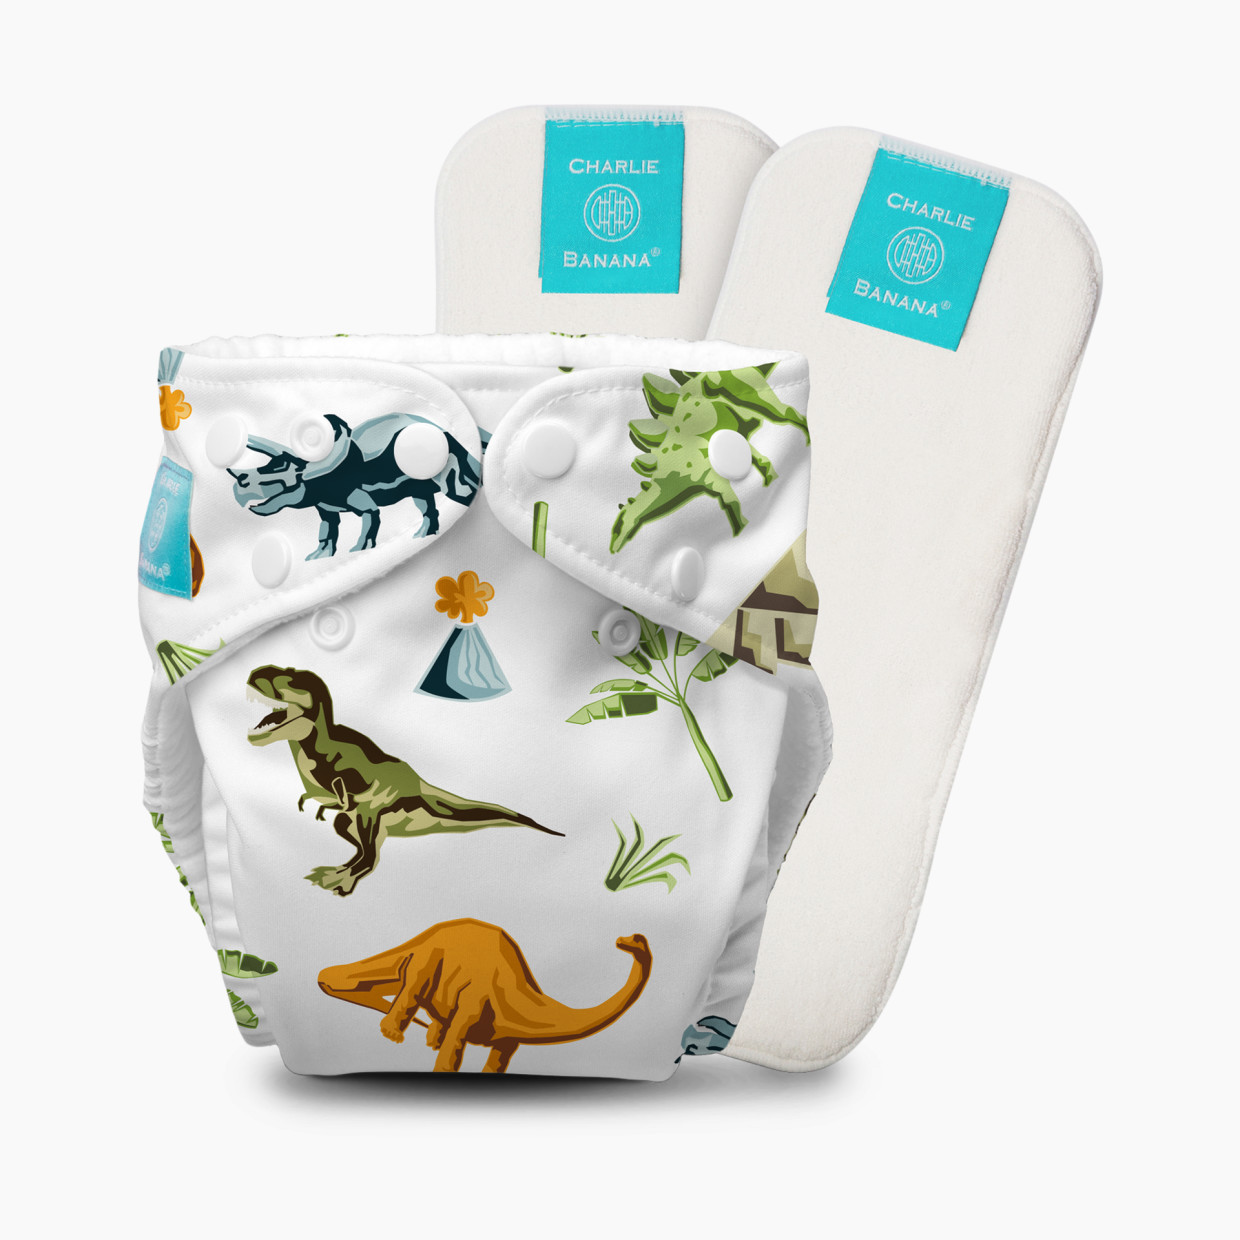 Charlie Banana One-size Reusable Cloth Diaper with 2 Reusable Inserts - Dinosaurs.